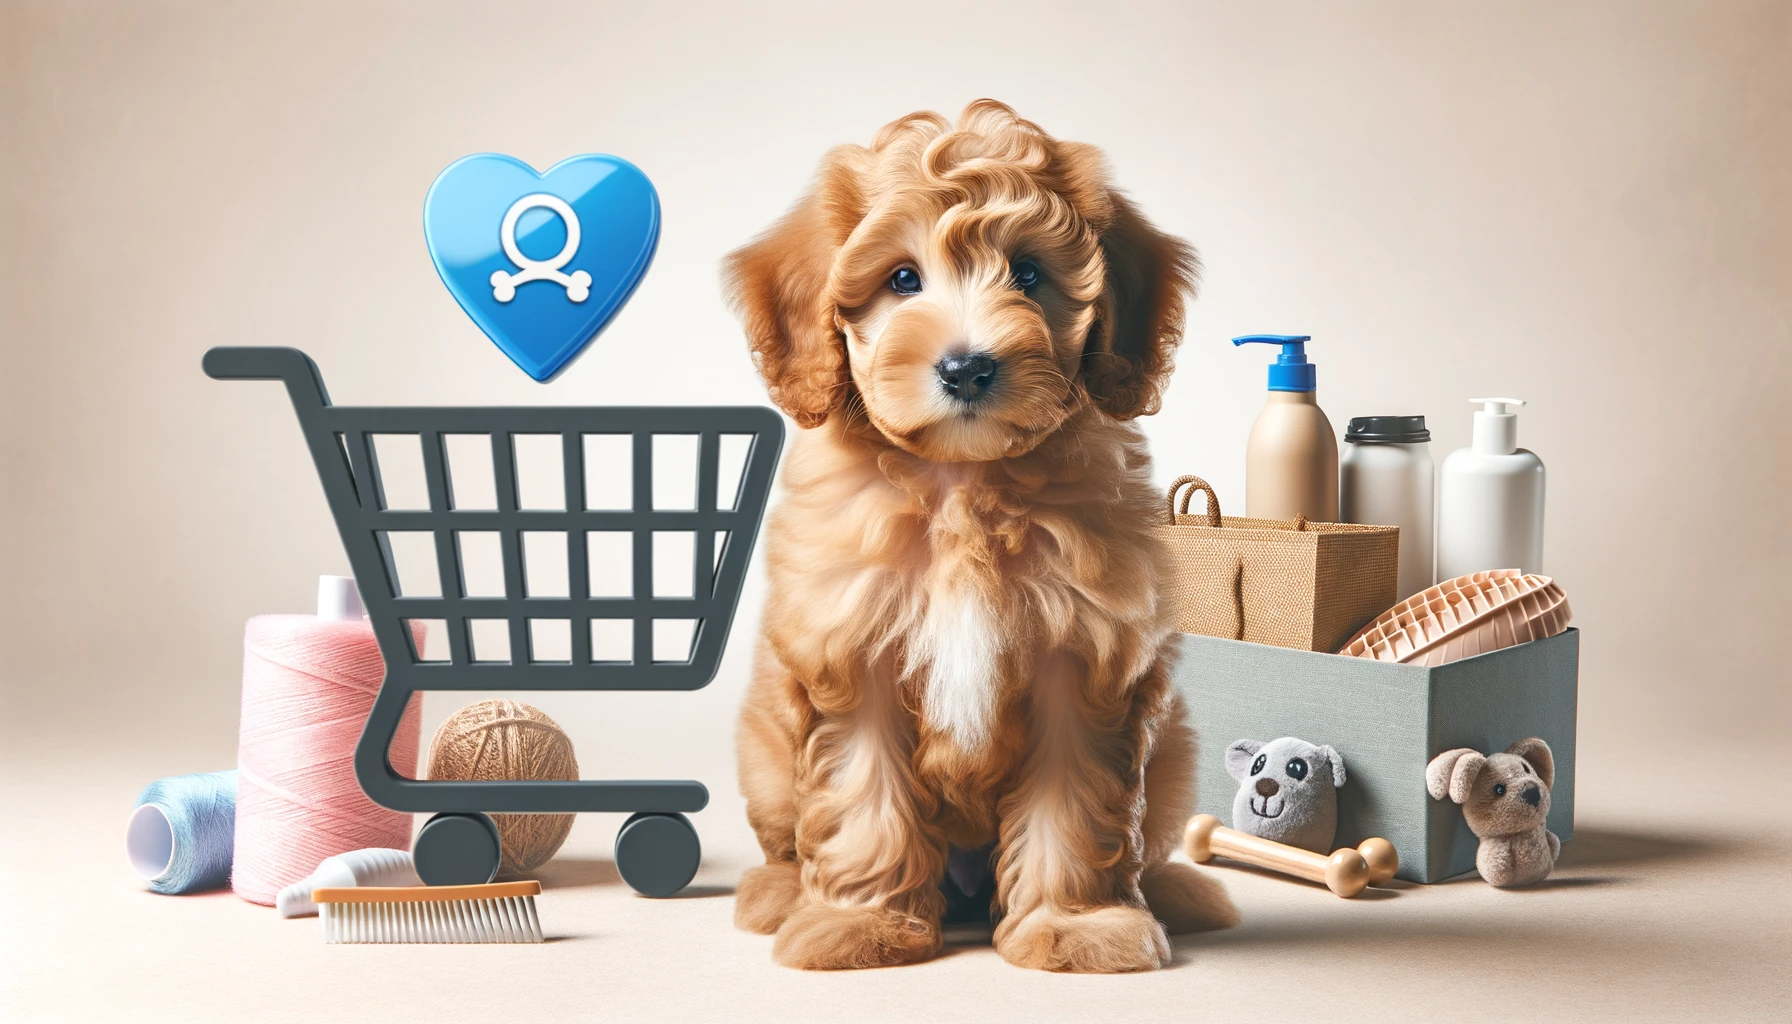 Photo of a cute Labradoodle puppy with soft, wavy fur standing next to a digital shopping cart icon. The background has pet accessories scattered around, representing the initial setup and ongoing costs of owning this breed.